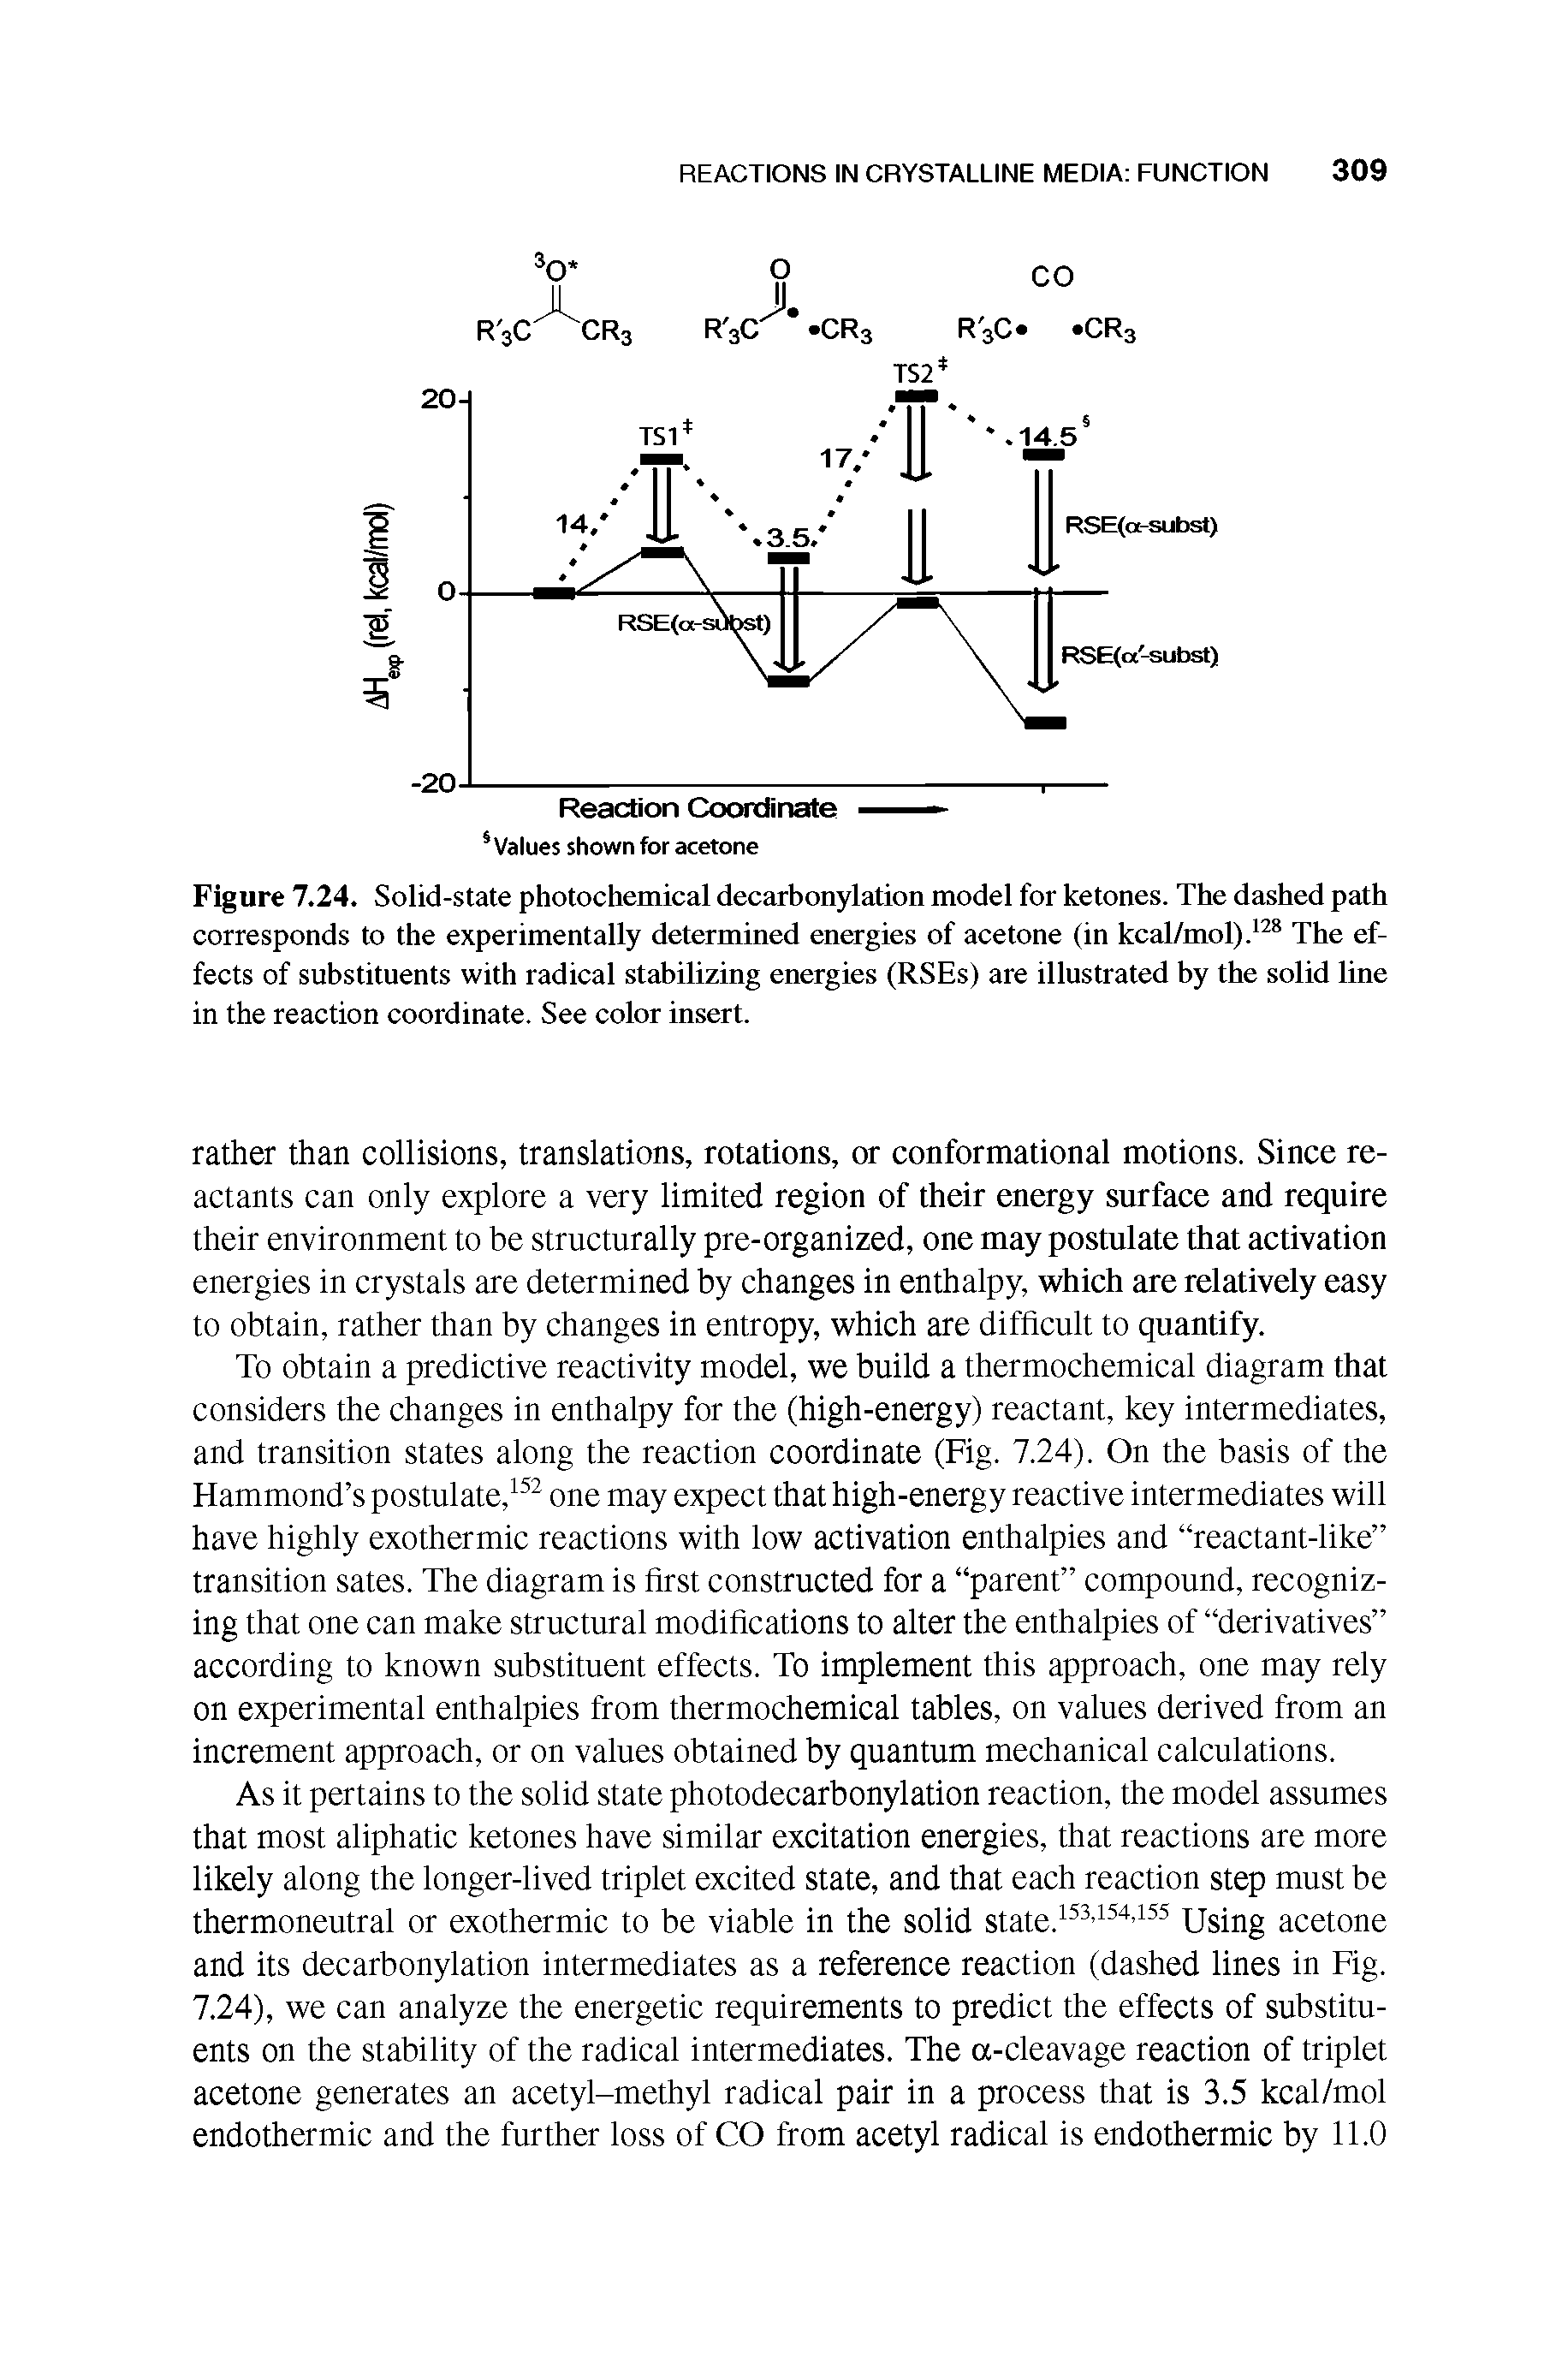 Figure 7.24. Solid-state photochemical decarbonylation model for ketones. The dashed path corresponds to the experimentally determined energies of acetone (in kcal/mol). The effects of substituents with radical stabilizing energies (RSEs) are illustrated by the solid line in the reaction coordinate. See color insert.